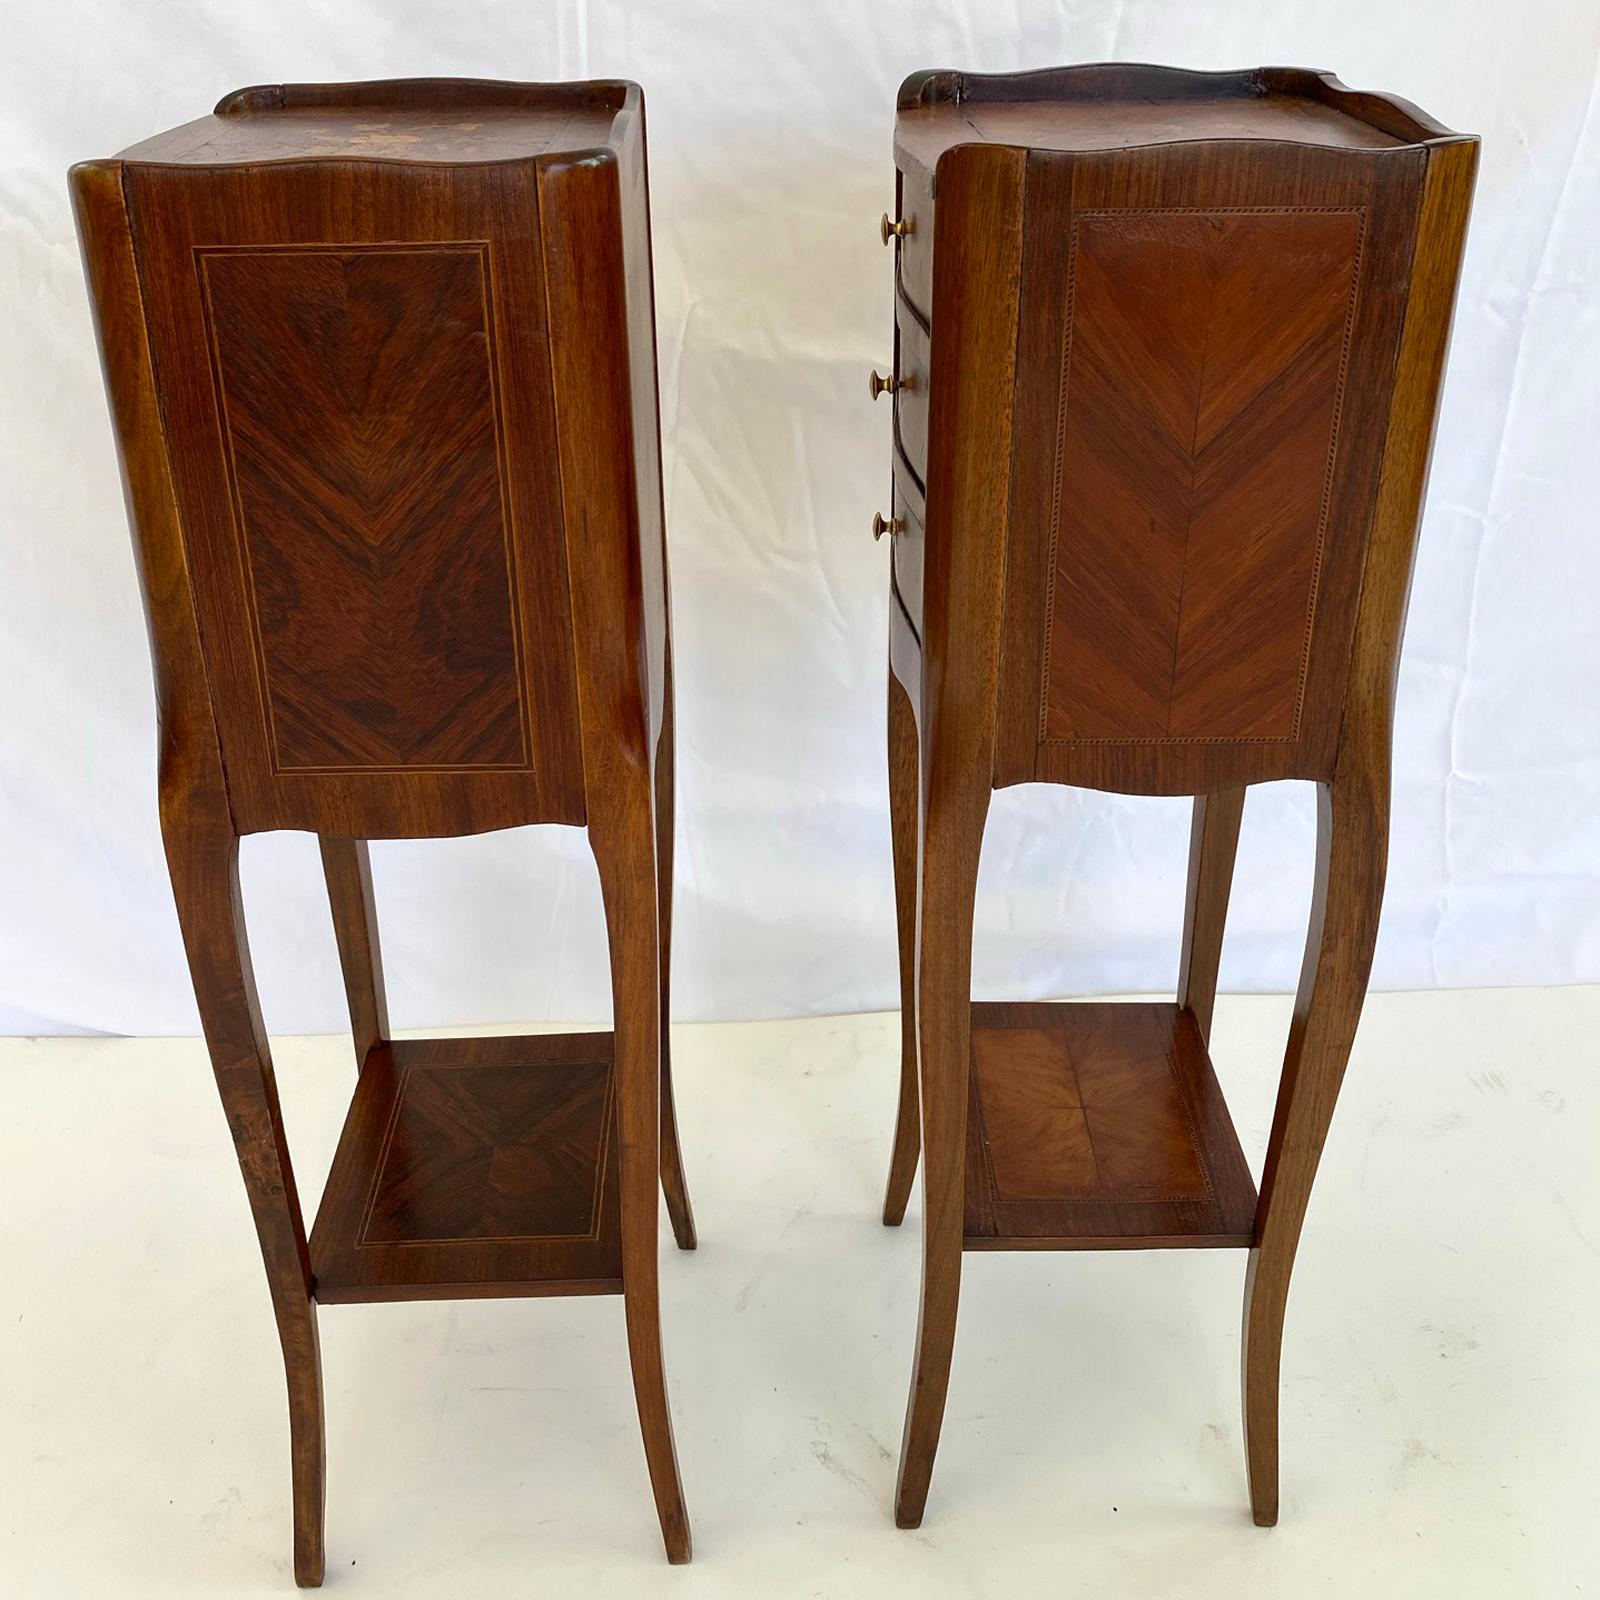 Inlay Pair of Petite Inlaid Candlestand Bedside Chests